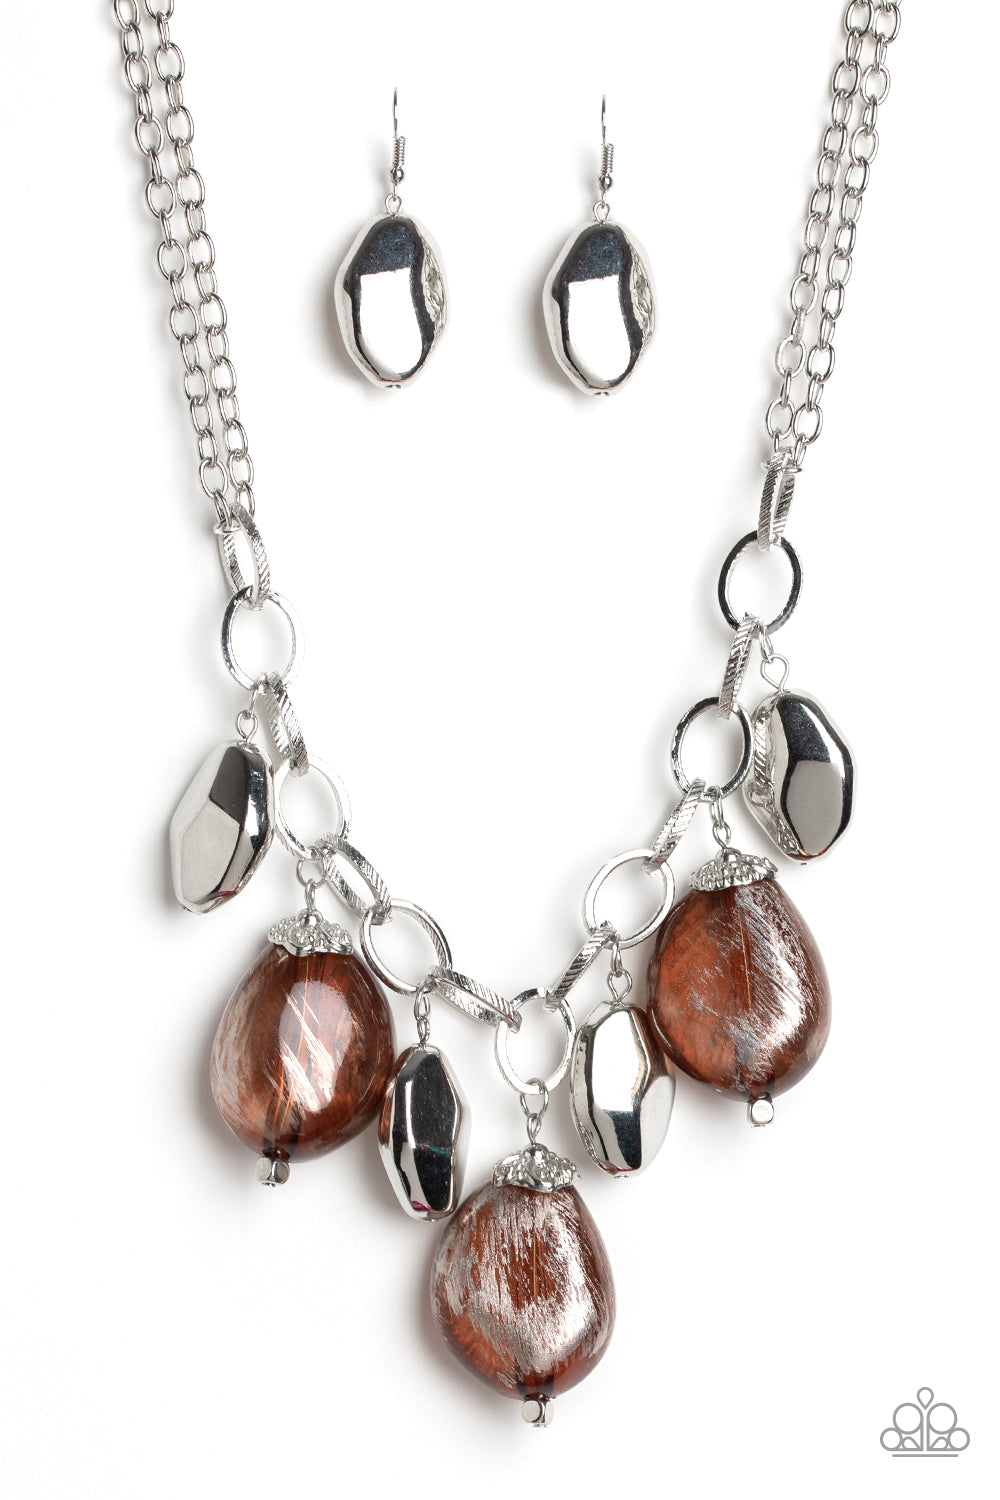 LOOKING GLASS GLAMOROUS - BROWN GLASSY BEADS NECKLACE